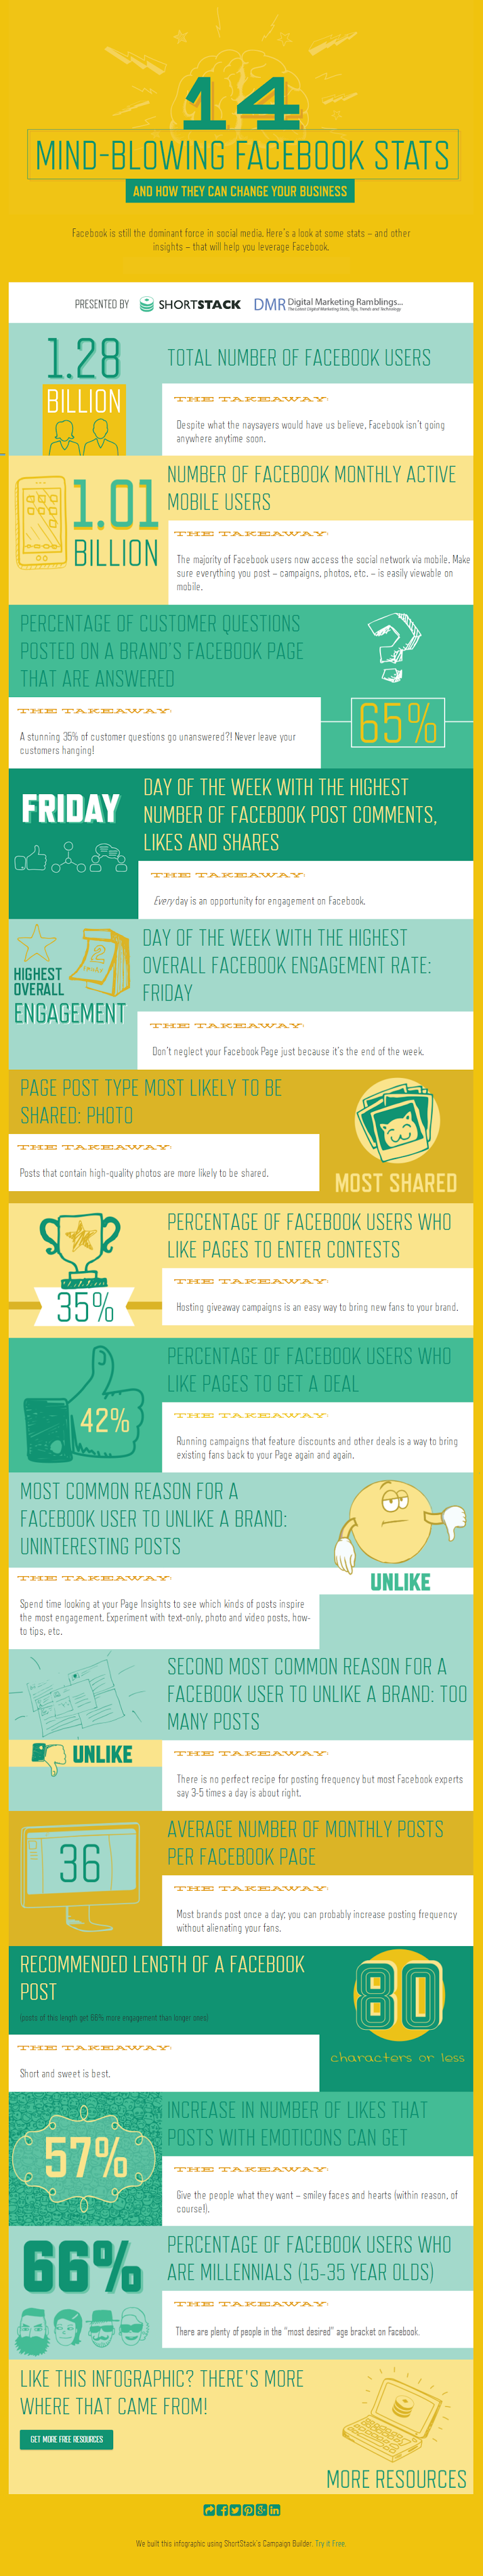 14-mind-blowing-facebook-stats-2014-infographic